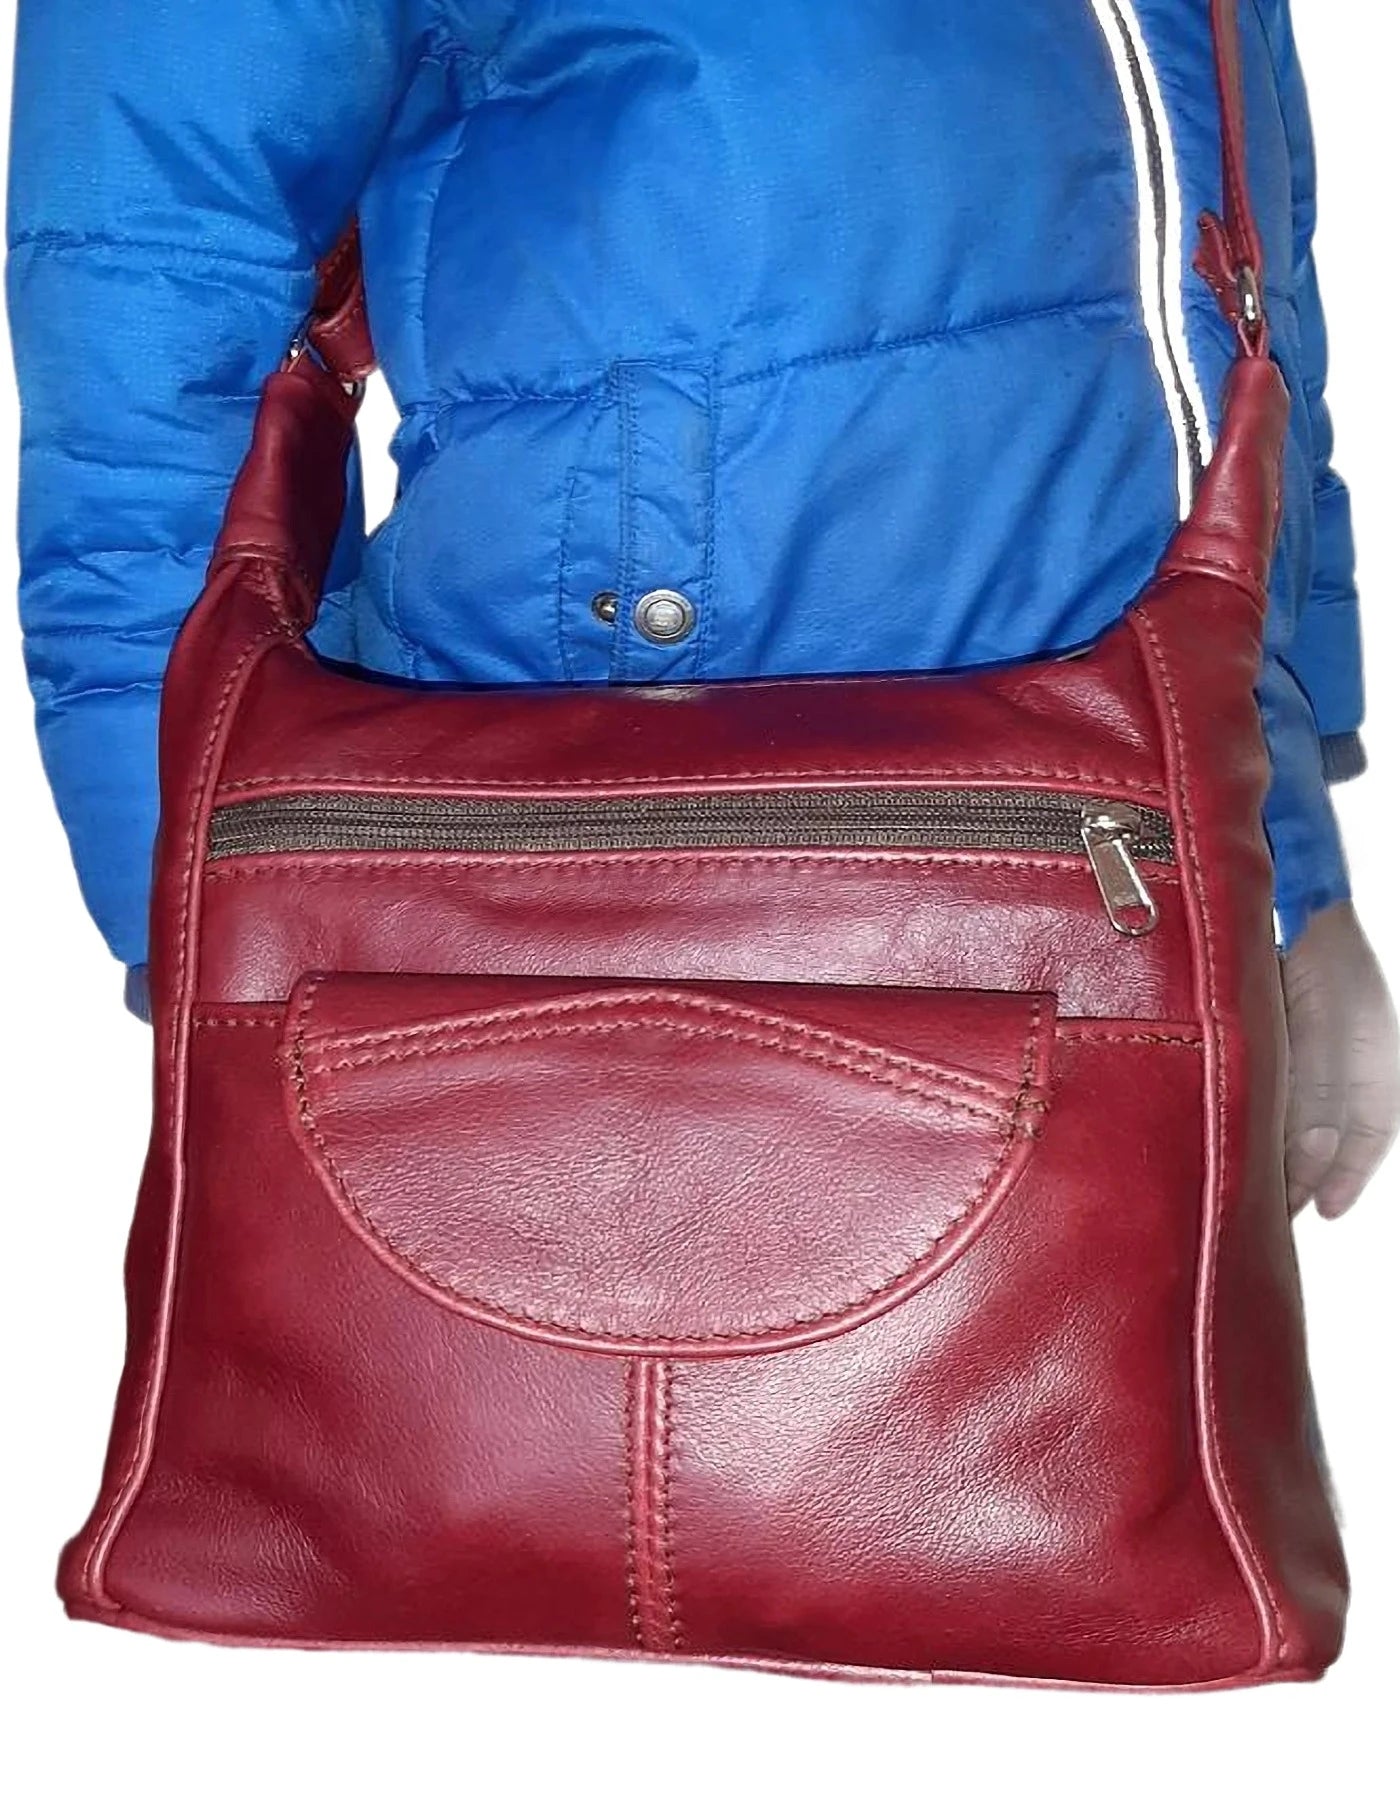 SH medium leather bags in cherry red colour from Cape Masai Leather